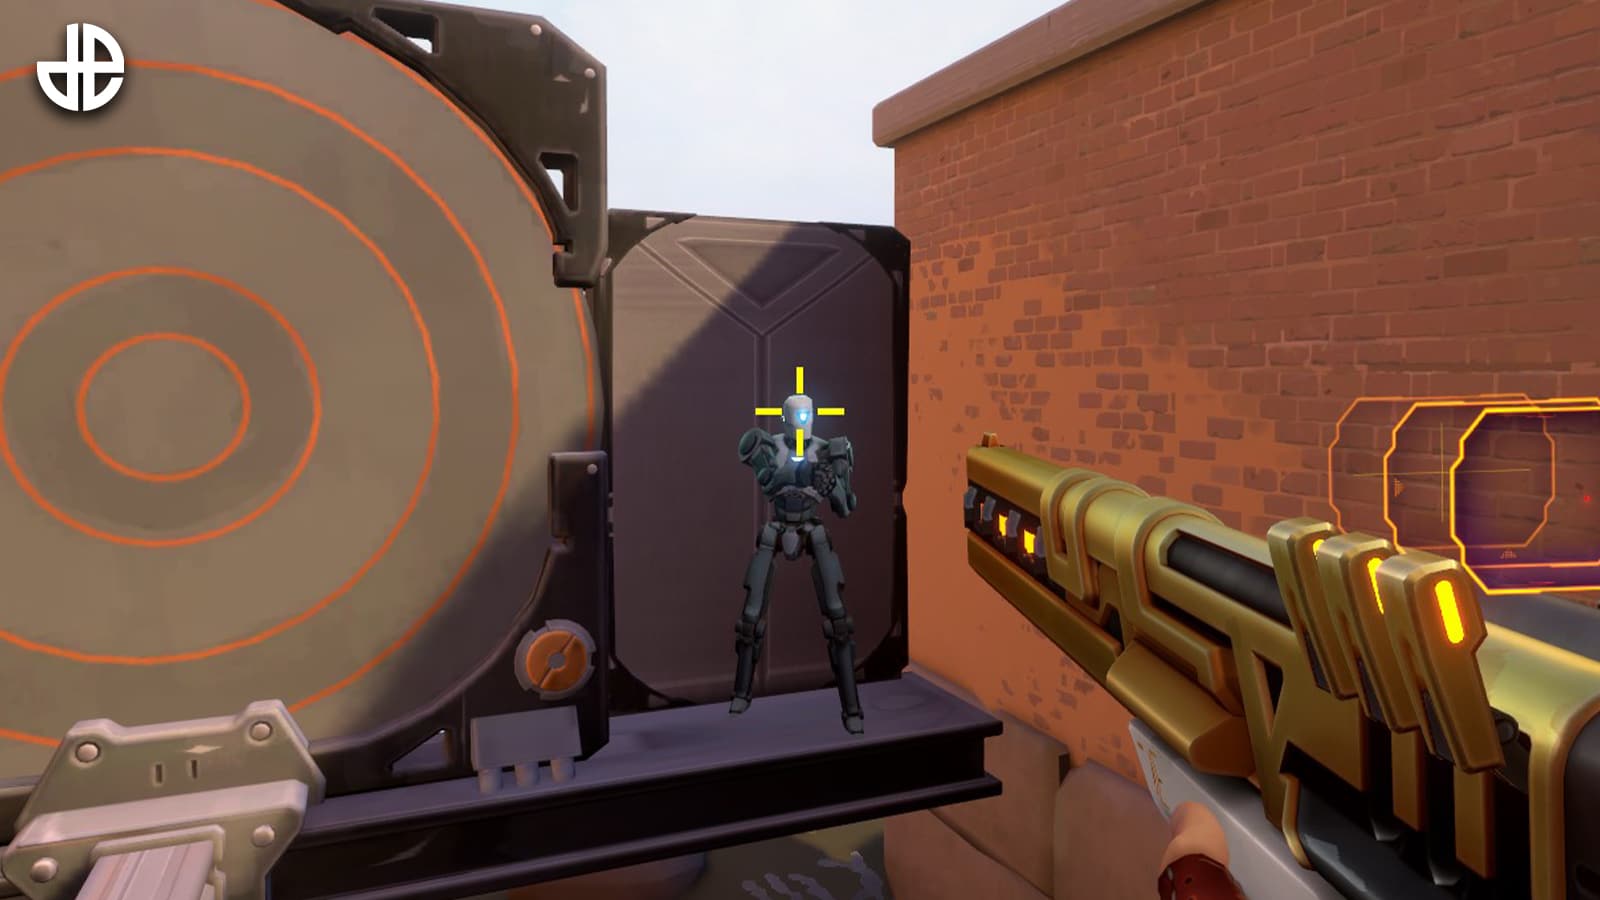 Chamber aiming his sniper at a bot in Practise Range